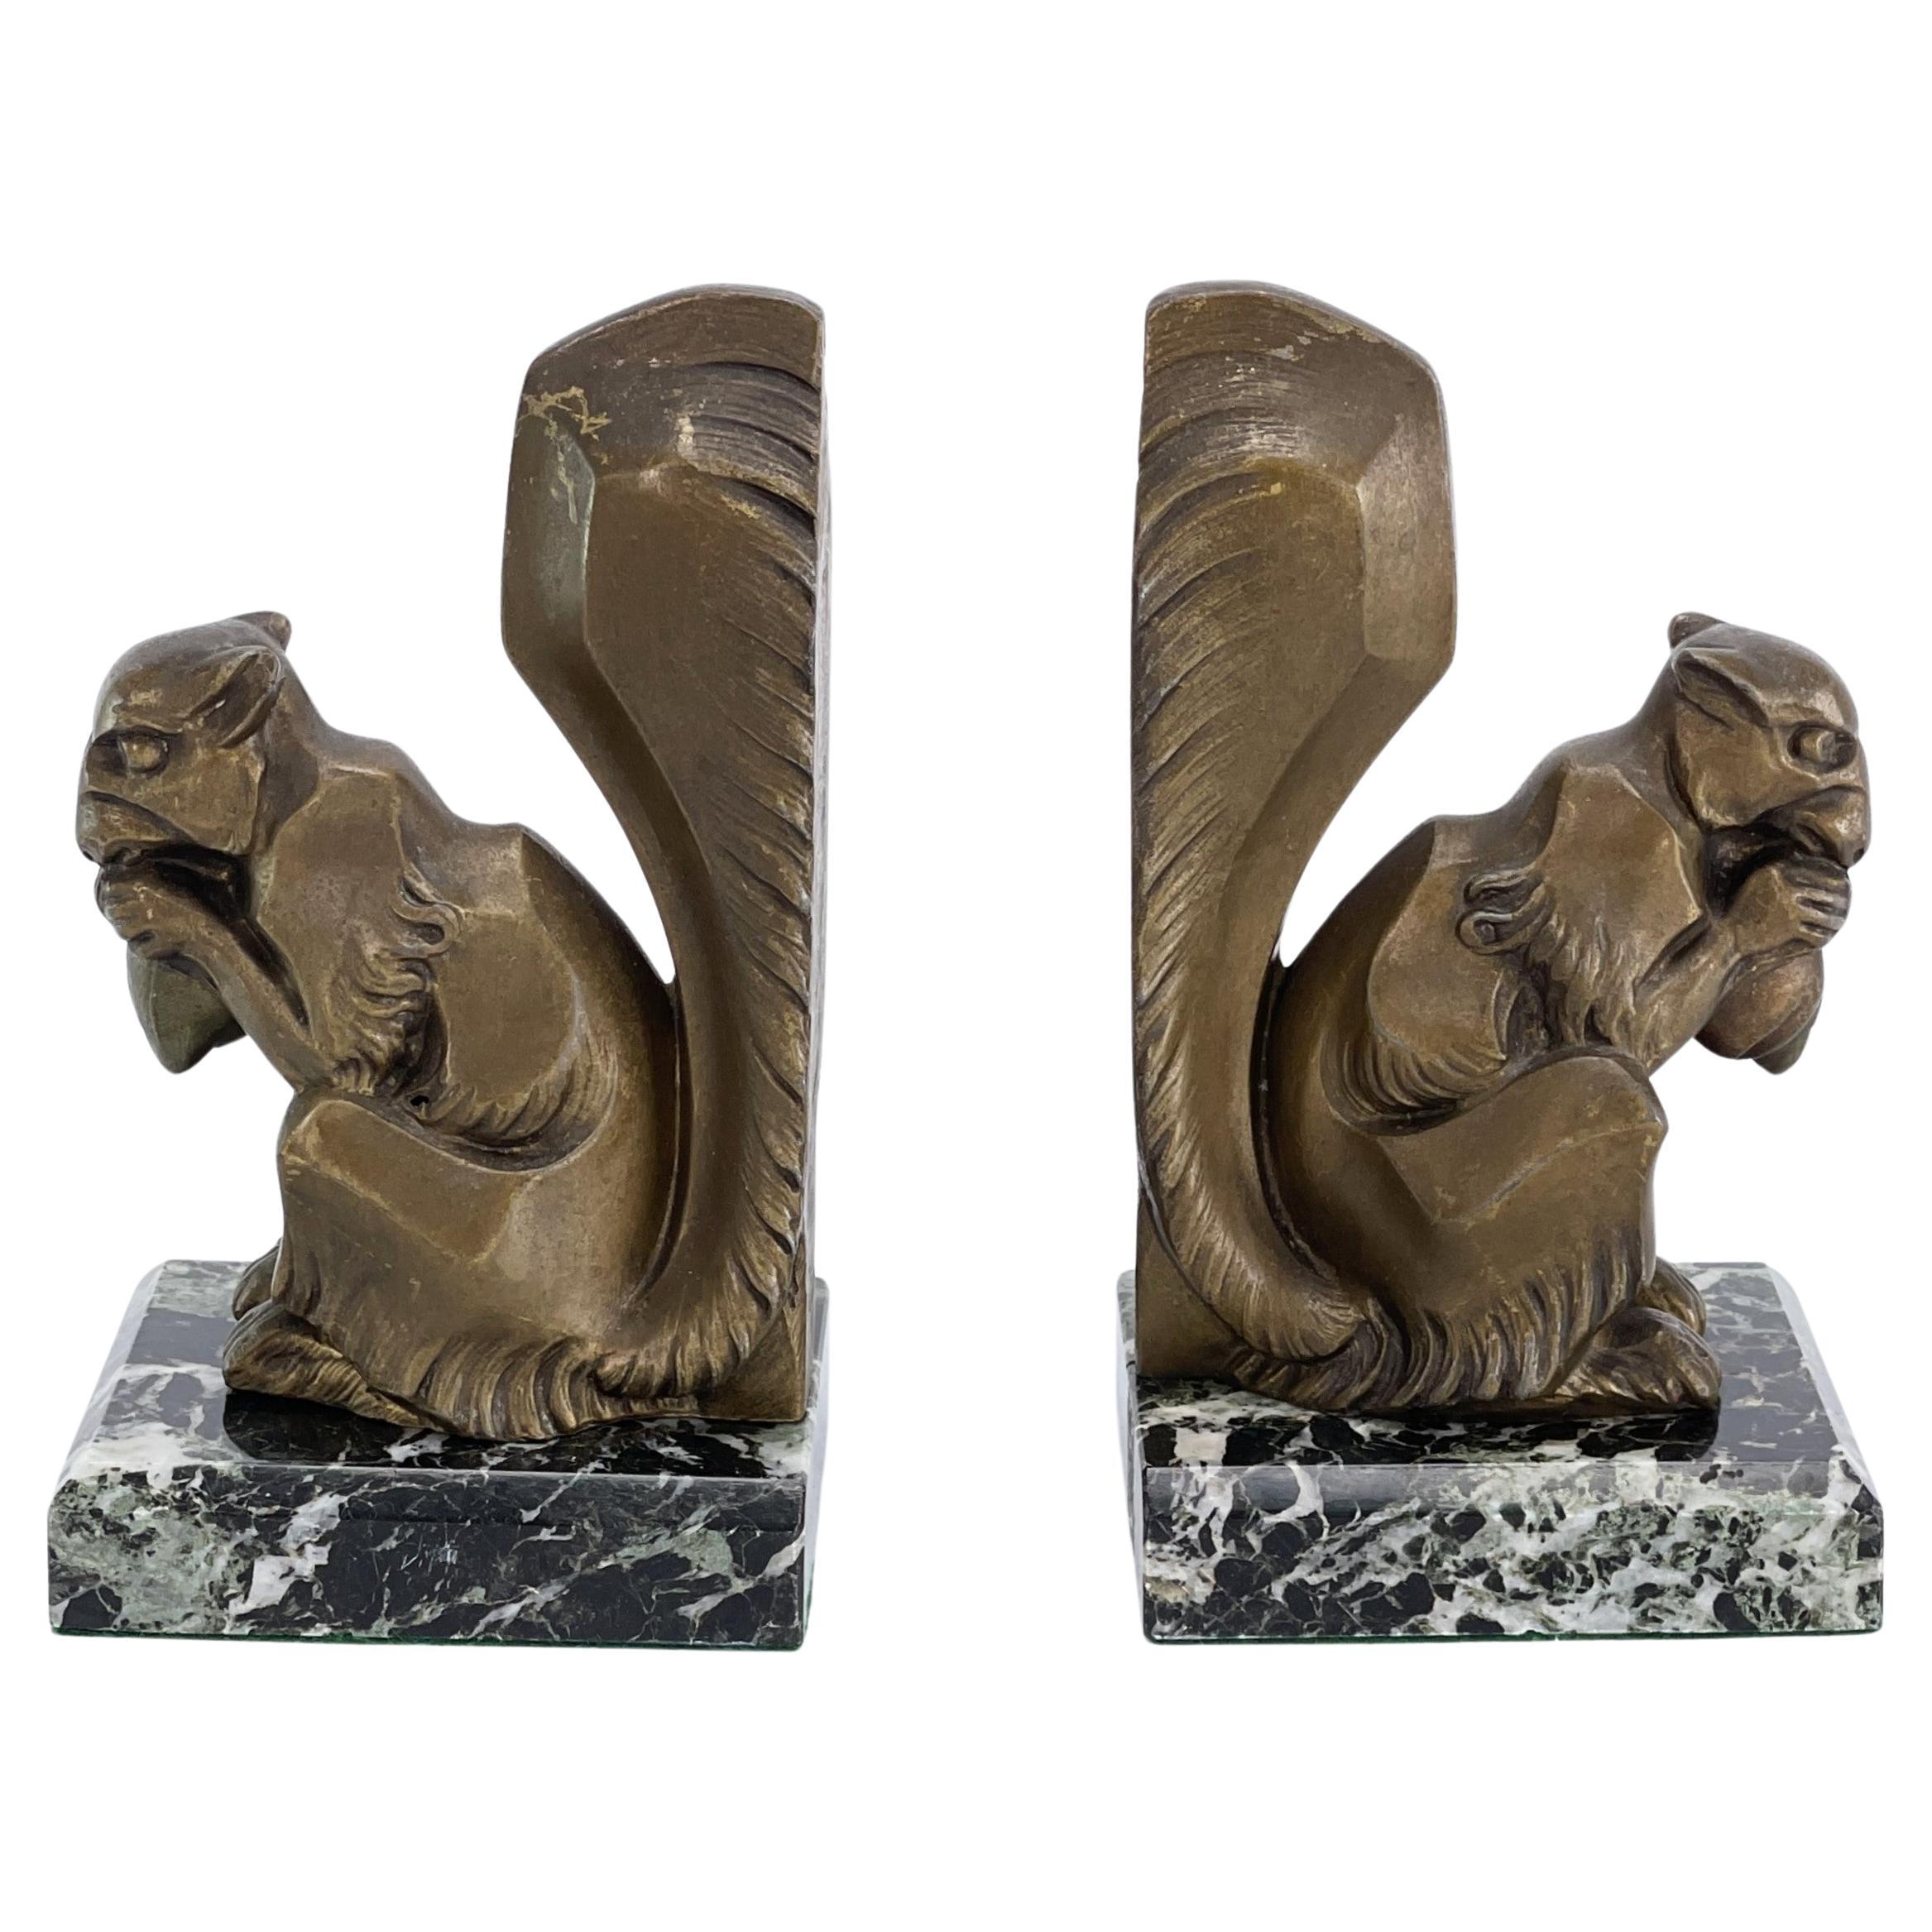 2 original ART DECO bookends with squirrel  marble base, 1930s